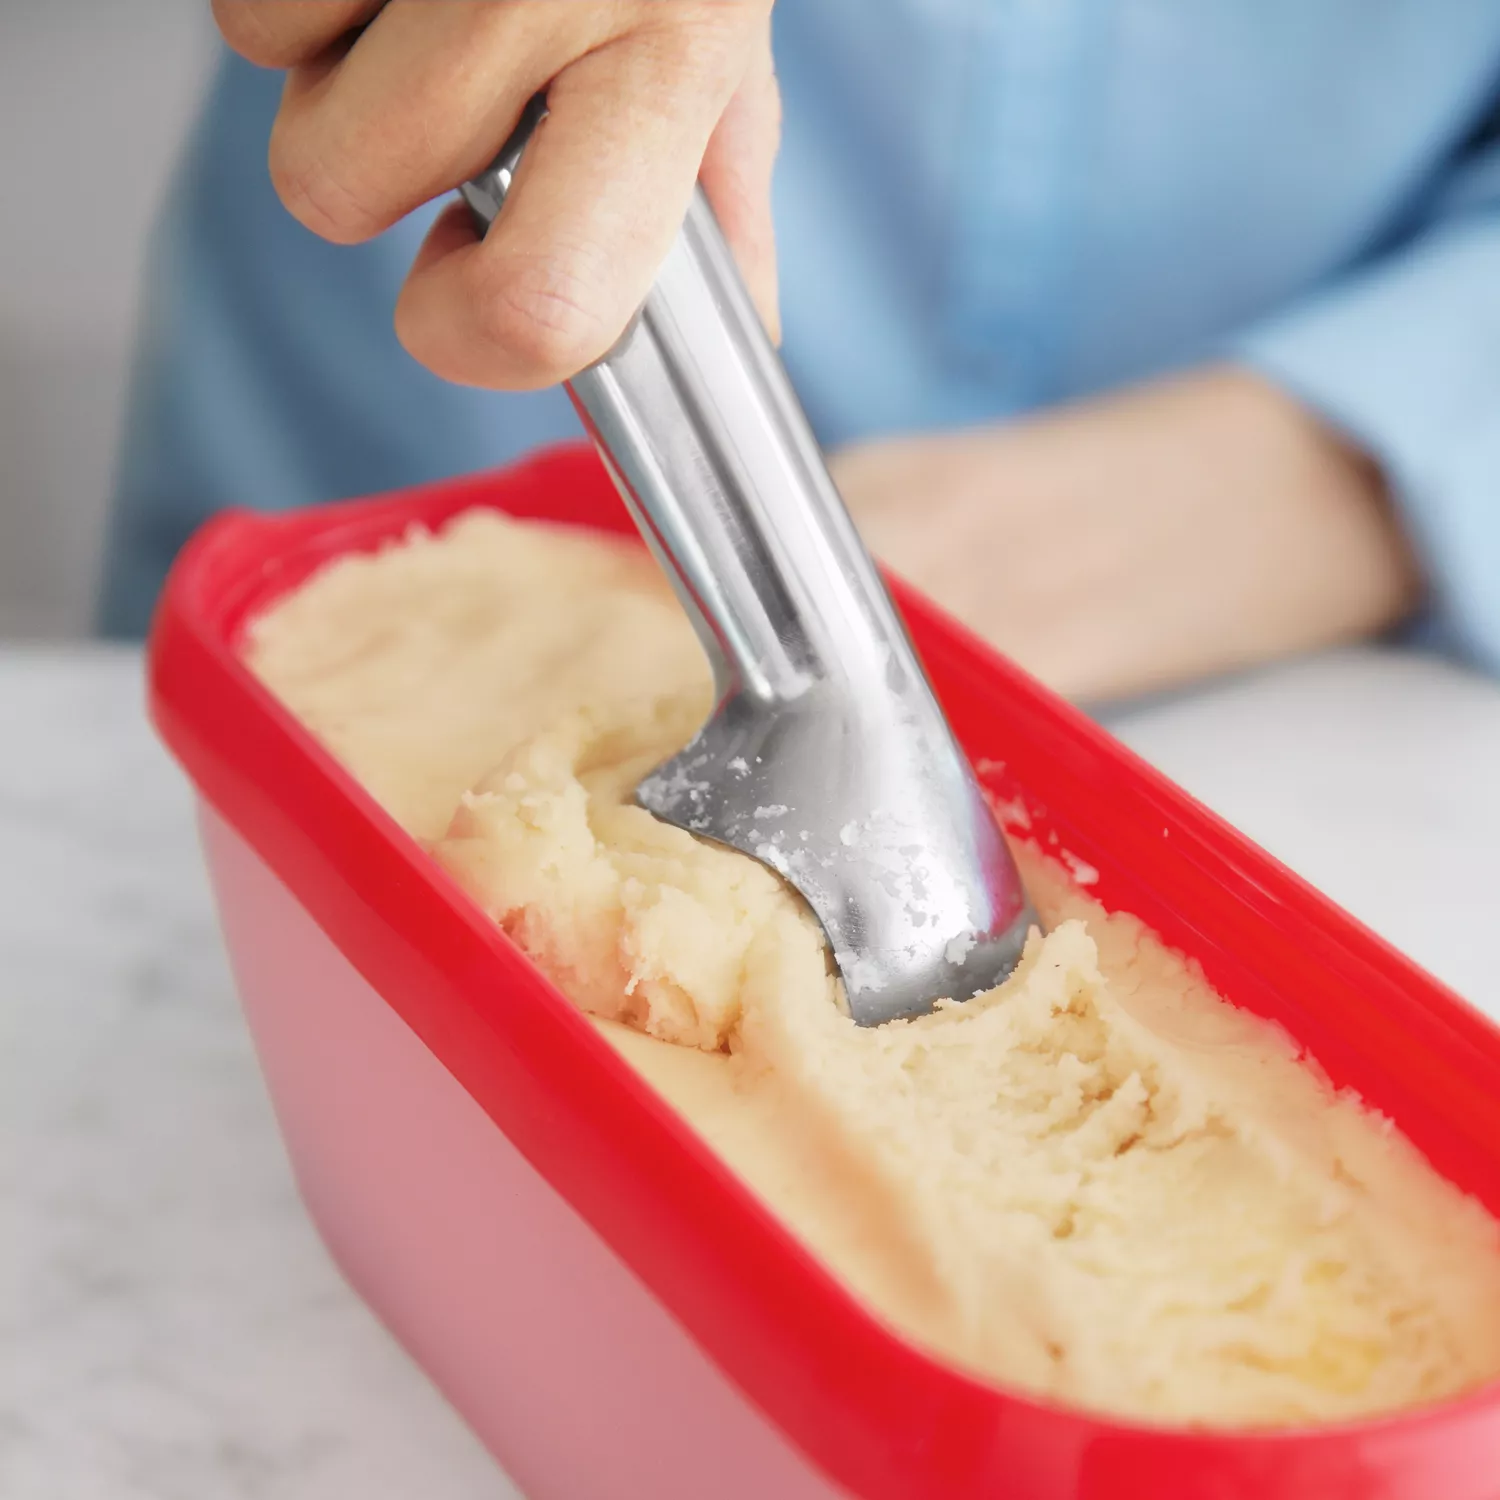 Zyliss Zyliss Red Ice Cream Scoop - The Kitchen Table